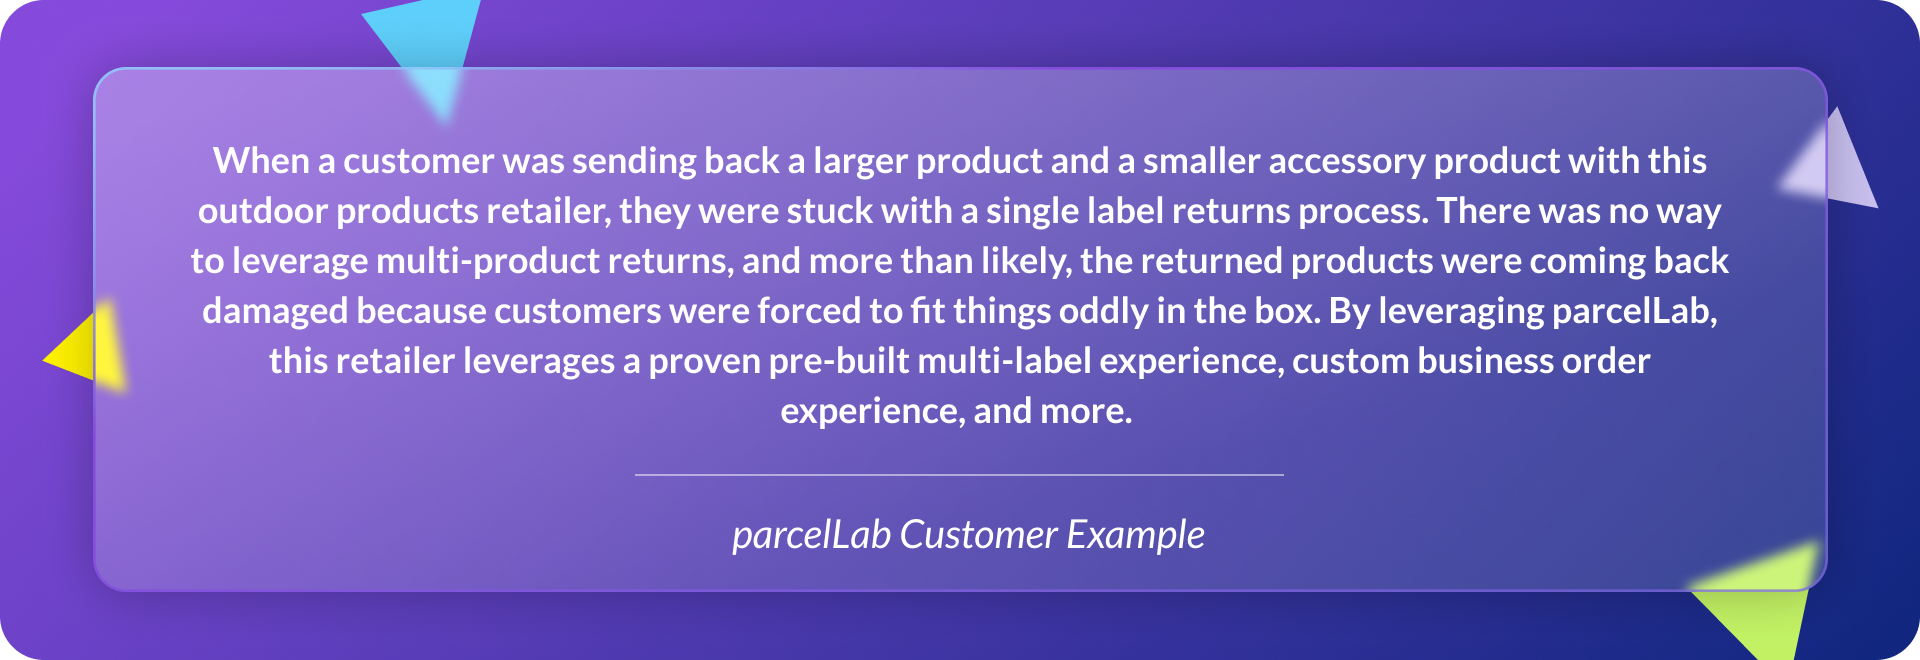 parcelLab customer example explaining how an outdoor product's retailer was stuck in a single label returns process and once they used parcelLab's software, they can now leverage a multi-label experience.